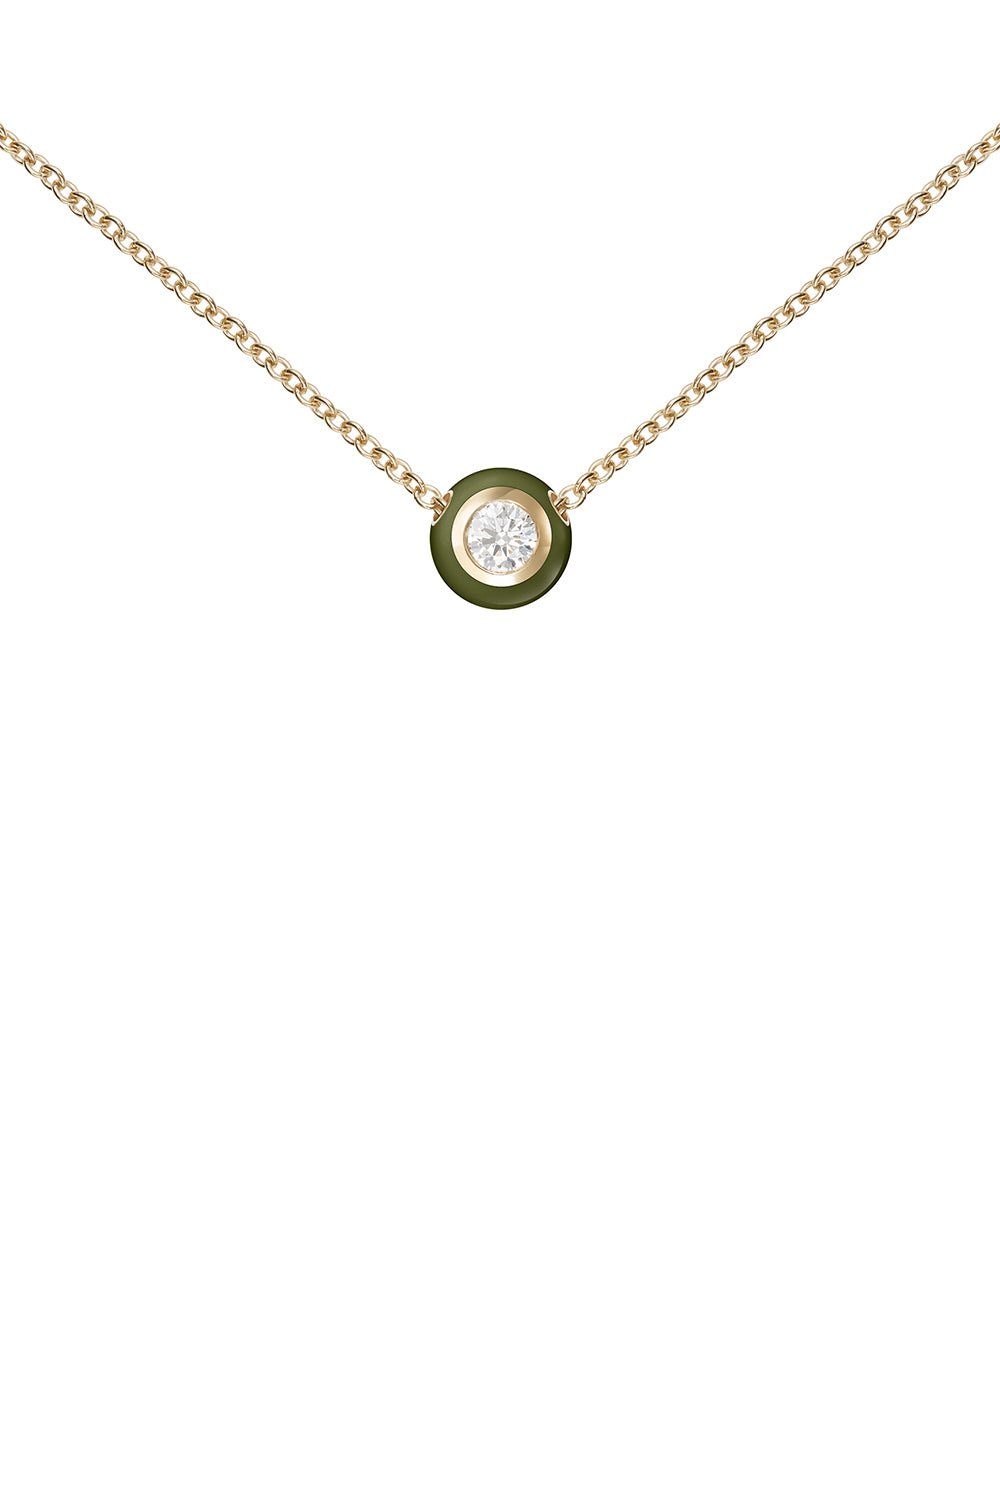 MELISSA KAYE-Small Army Green Audrey Necklace-YELLOW GOLD